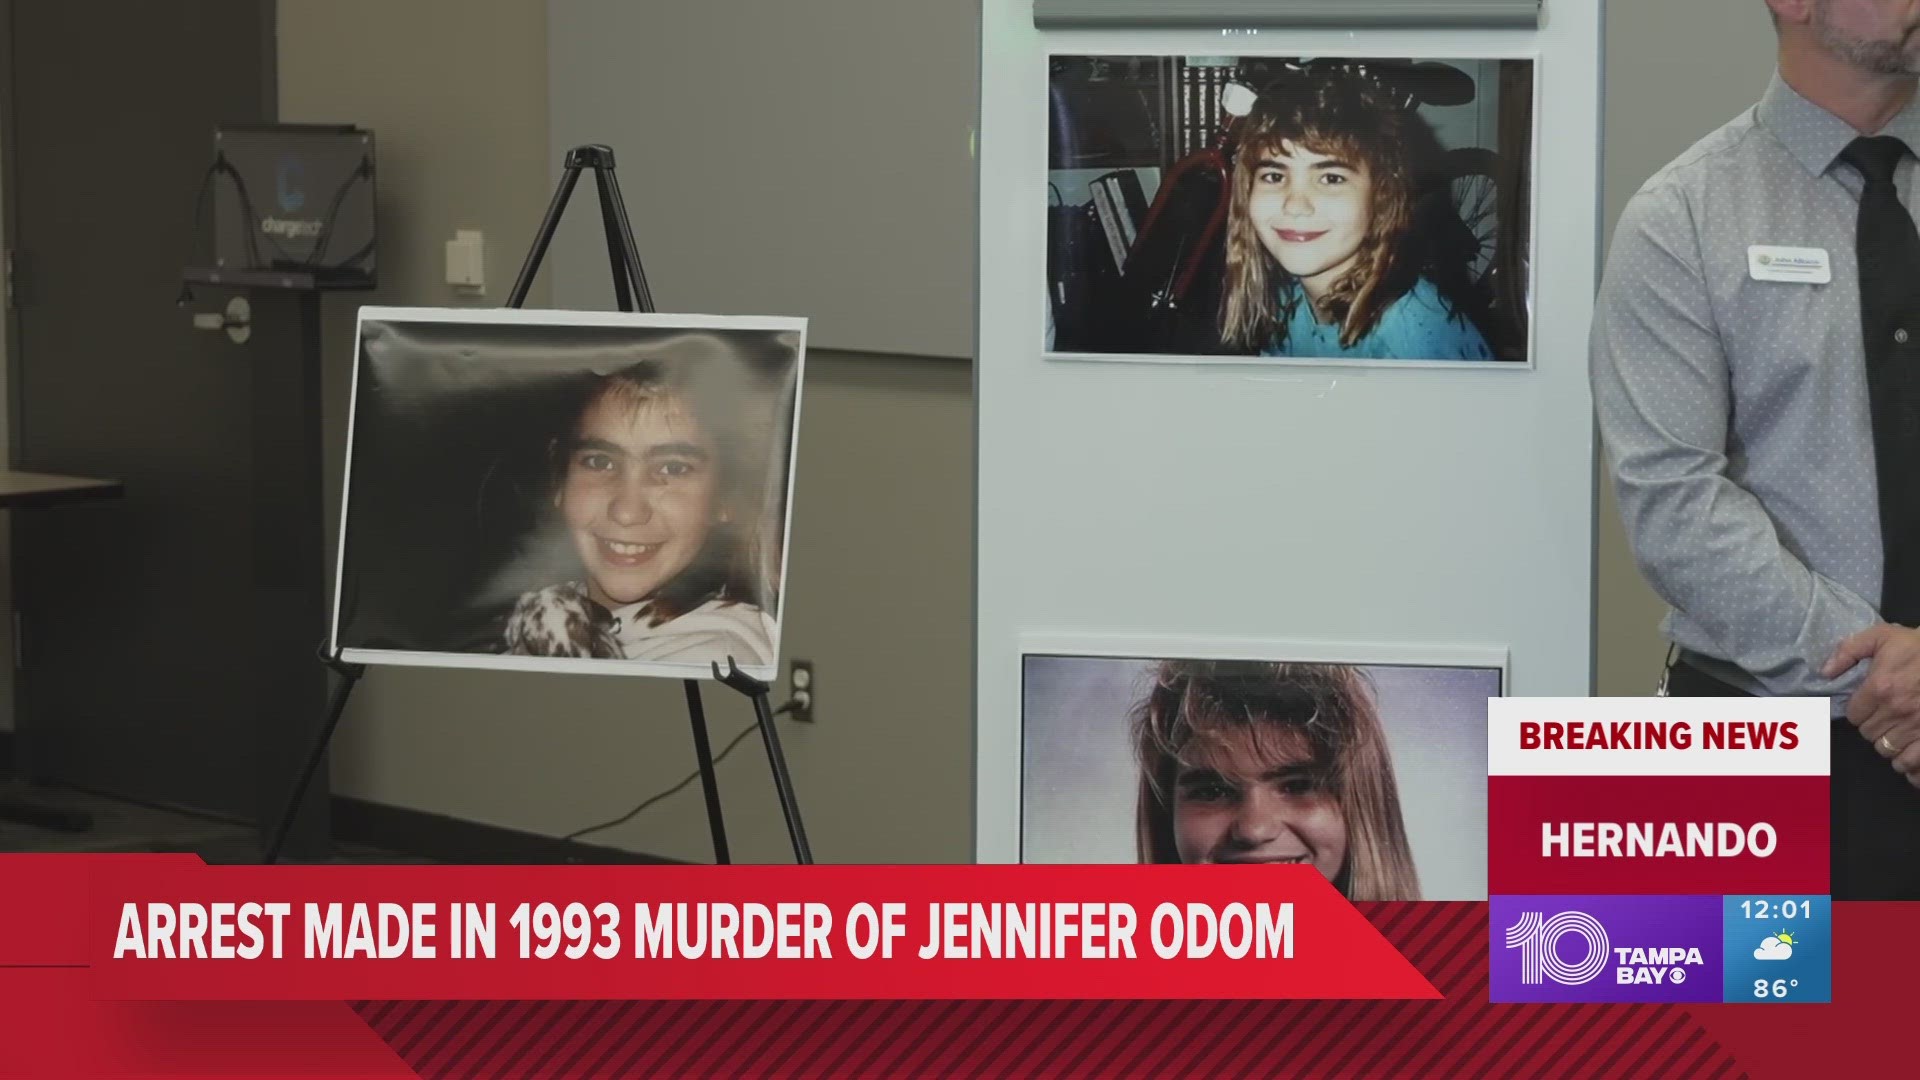 Jeffrey Crum, now 61, has been arrested in connection to the 1993 murder of 12-year-old Jennifer Odom.